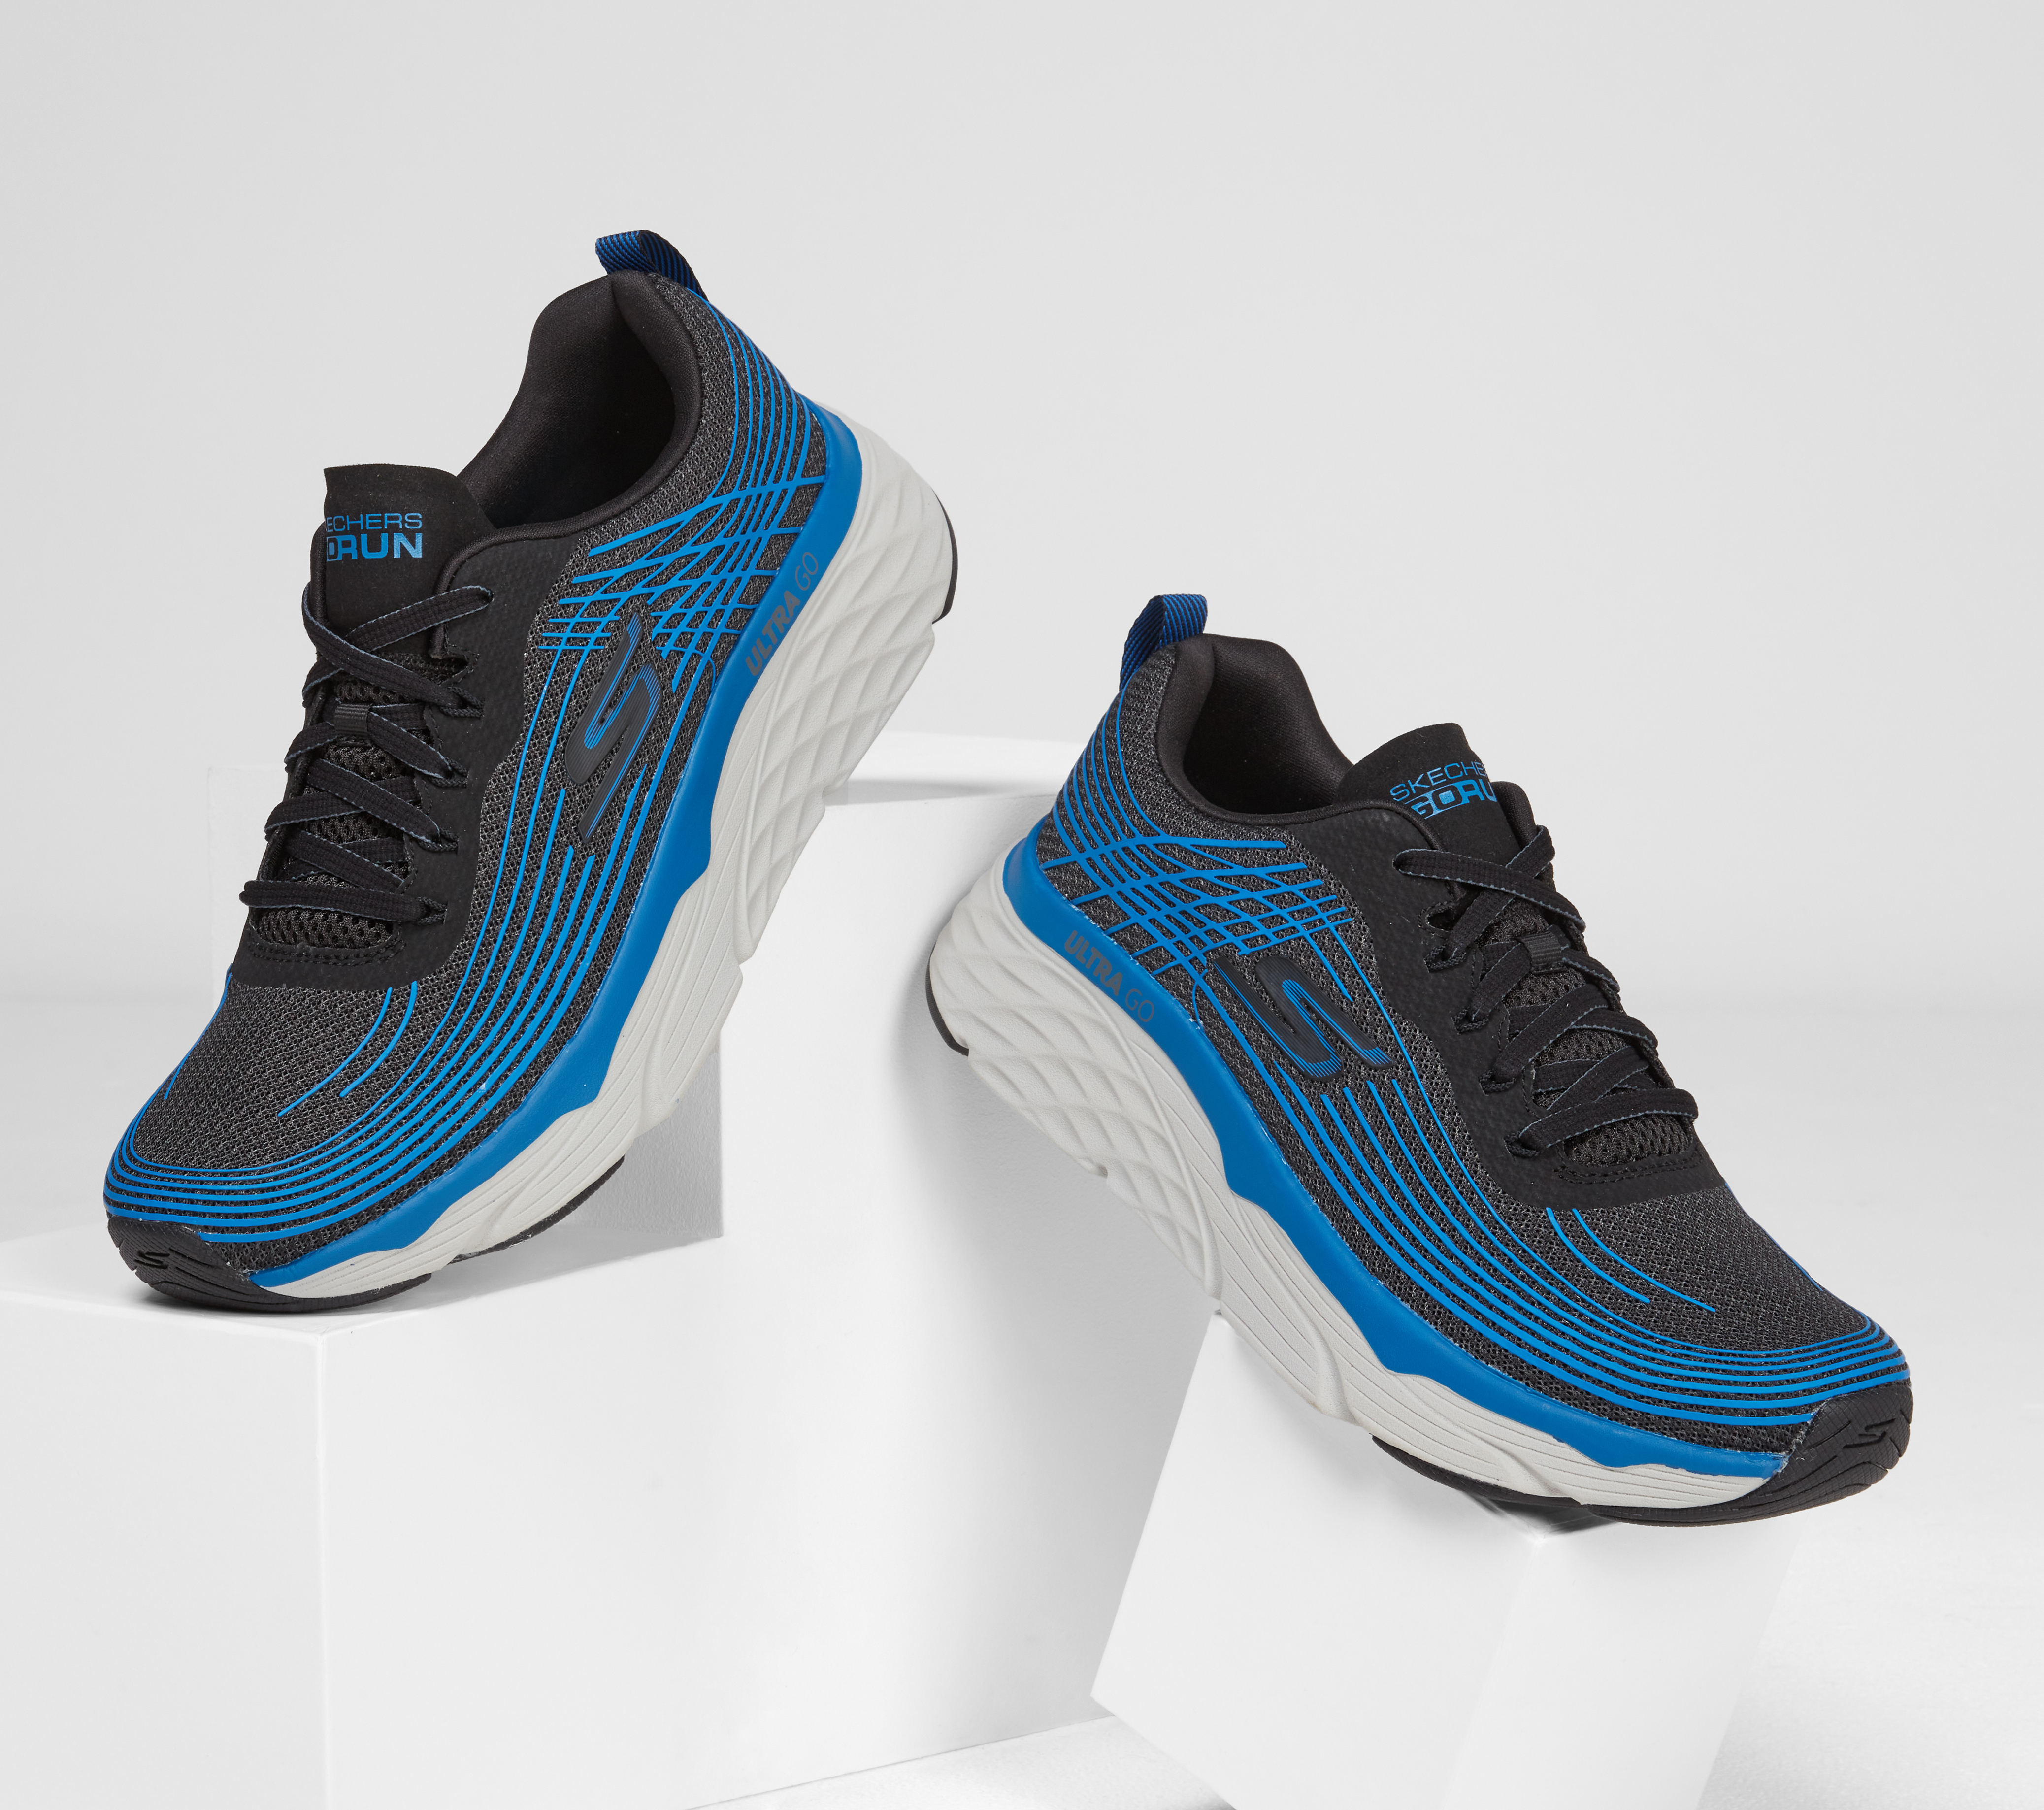 skechers max cushion shoes